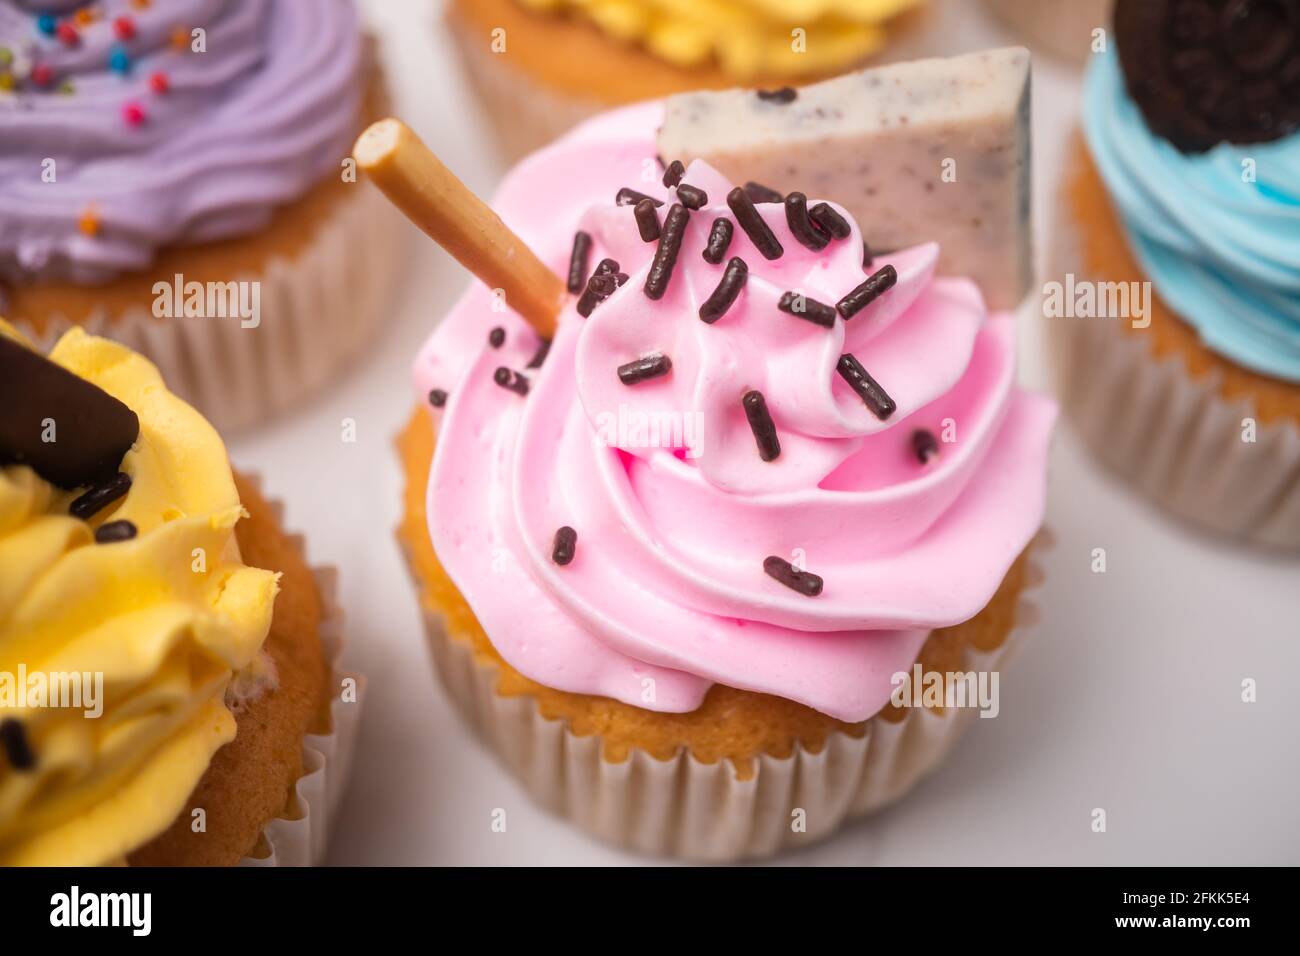 Delicious homemade cupcakes with Colorful cream and topping with candy and Chocolate Cookies. Homemade autumn holiday dessert Stock Photo